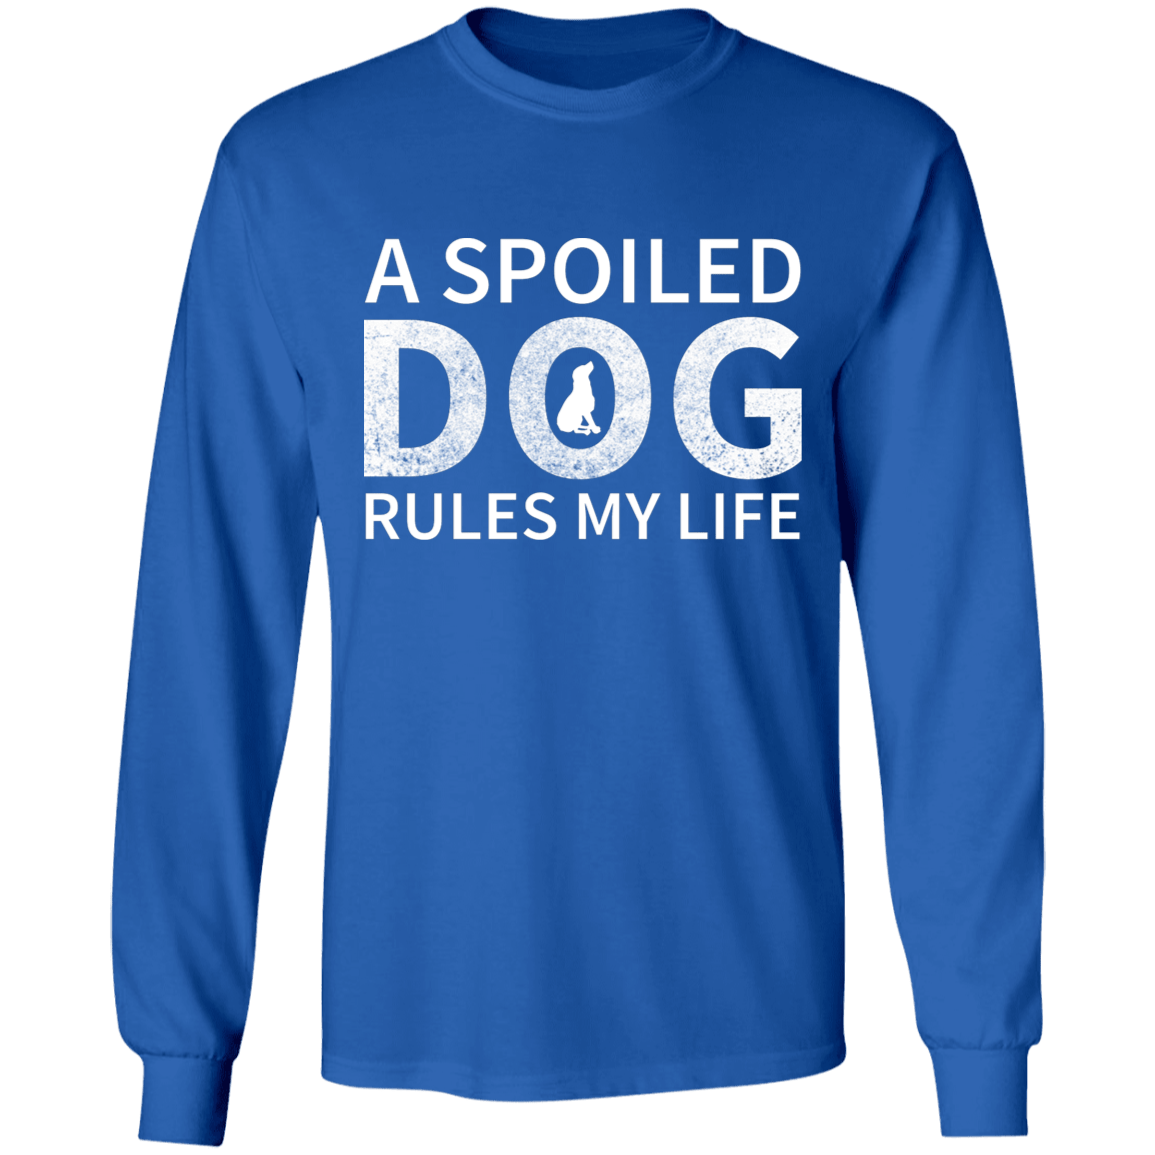 A Spoiled Dog Rules My Life - Long Sleeve T Shirt.